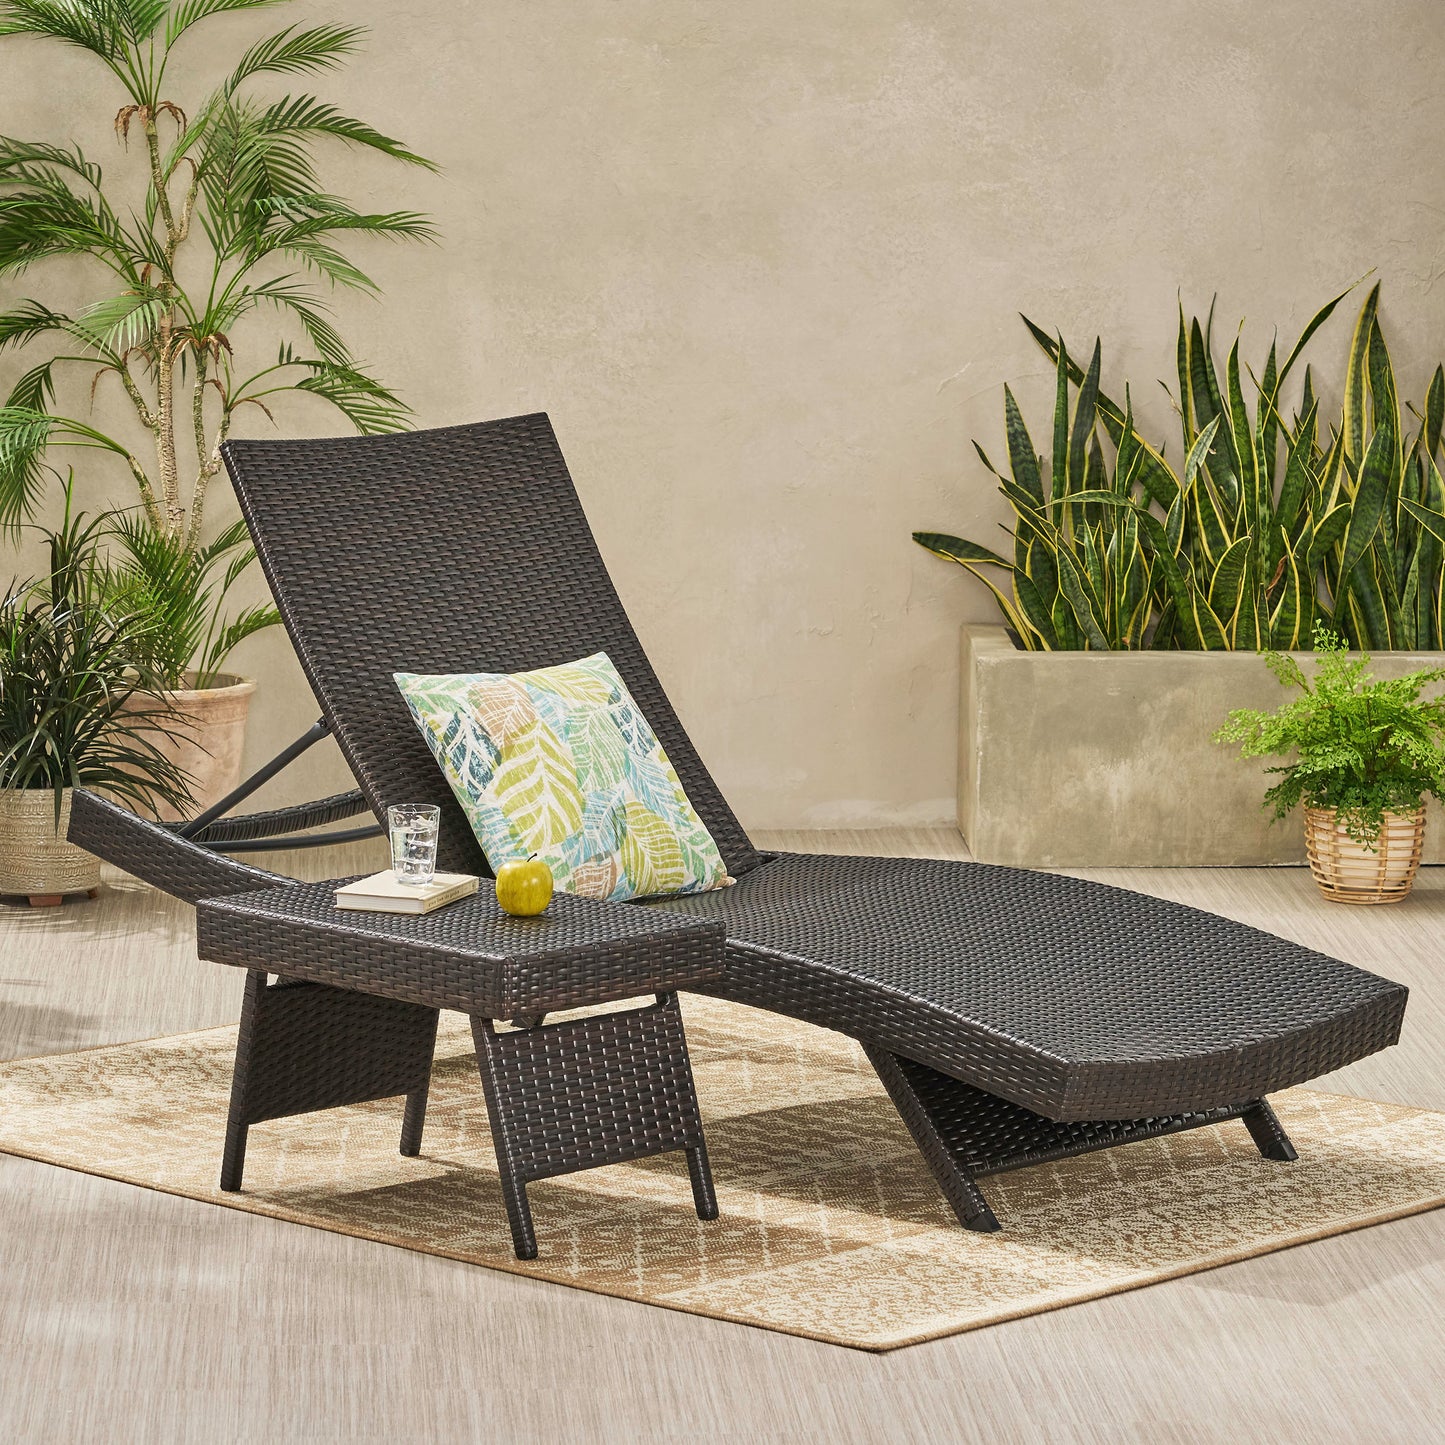 Lakeport Outdoor Wicker Lounge and Table